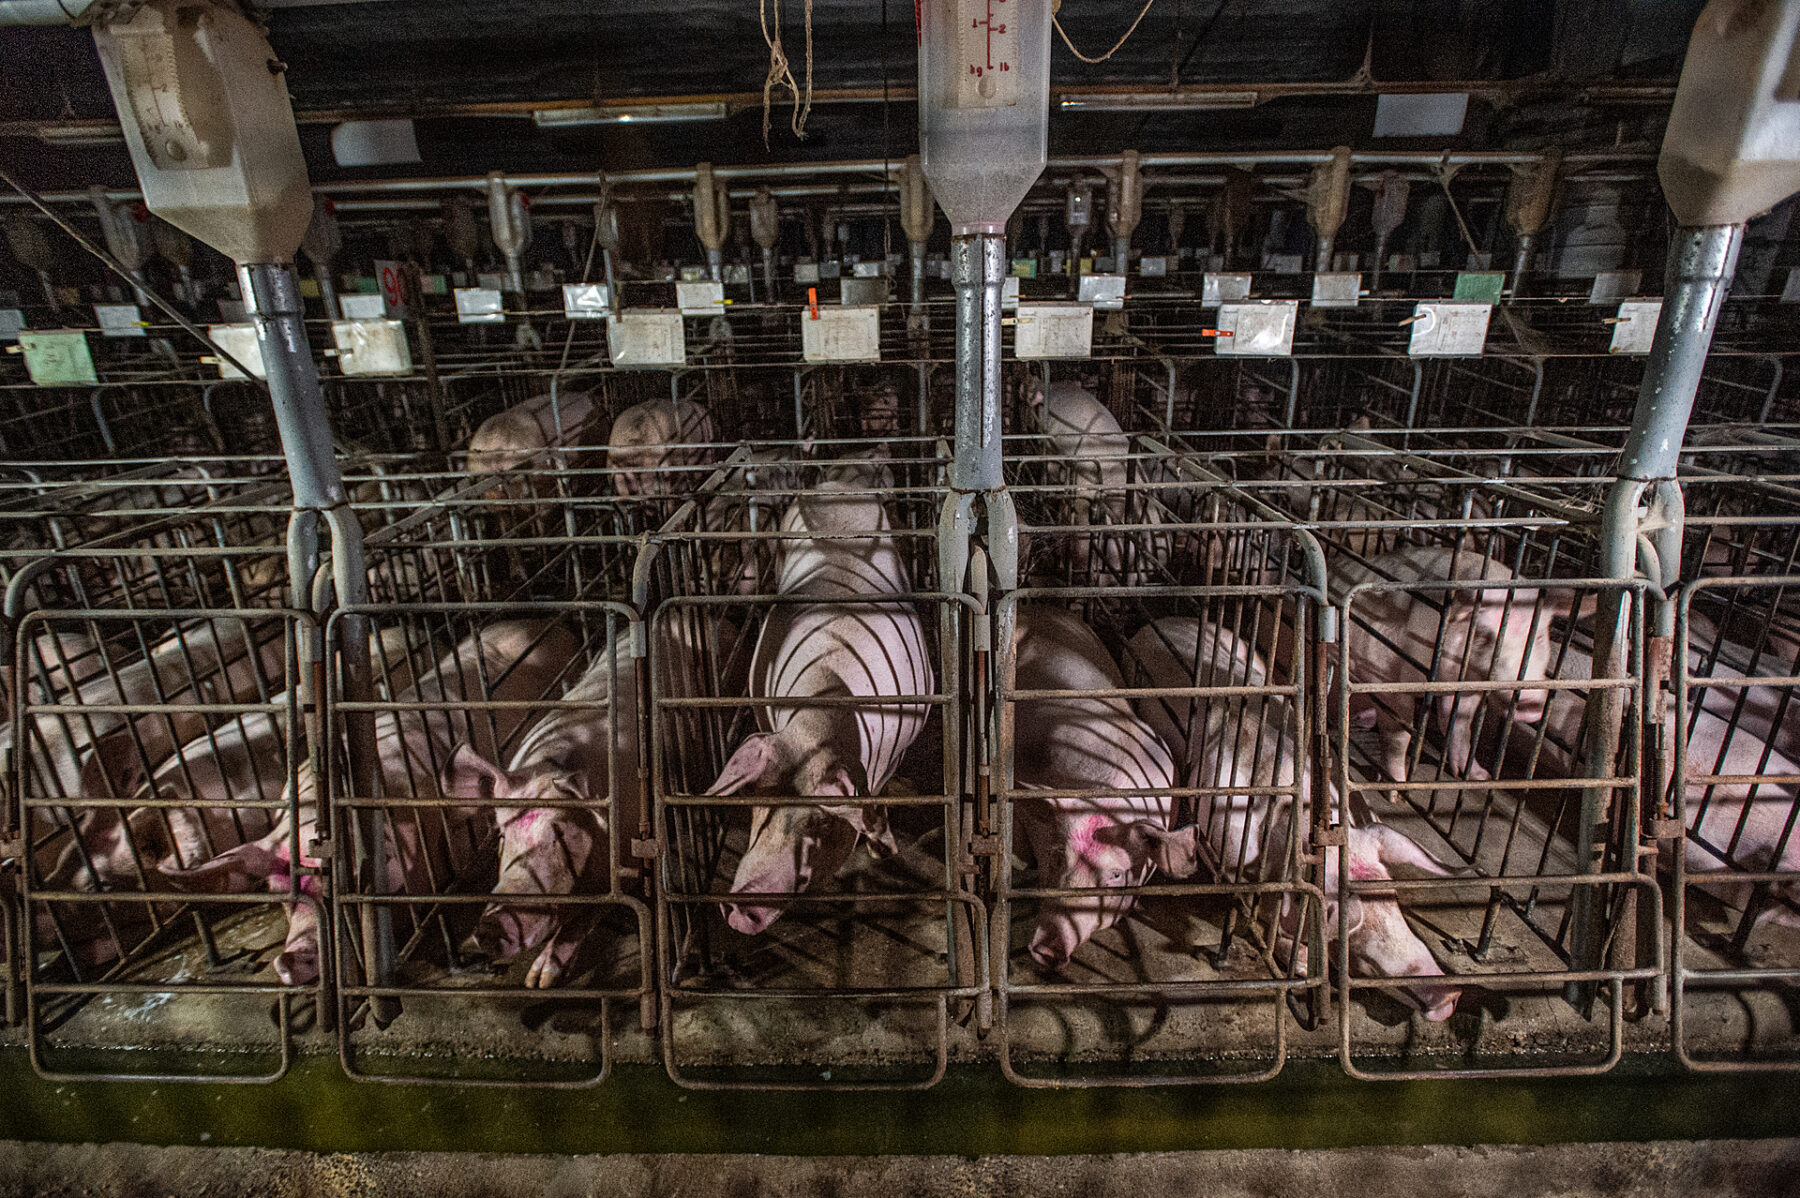 pigs confined in cages